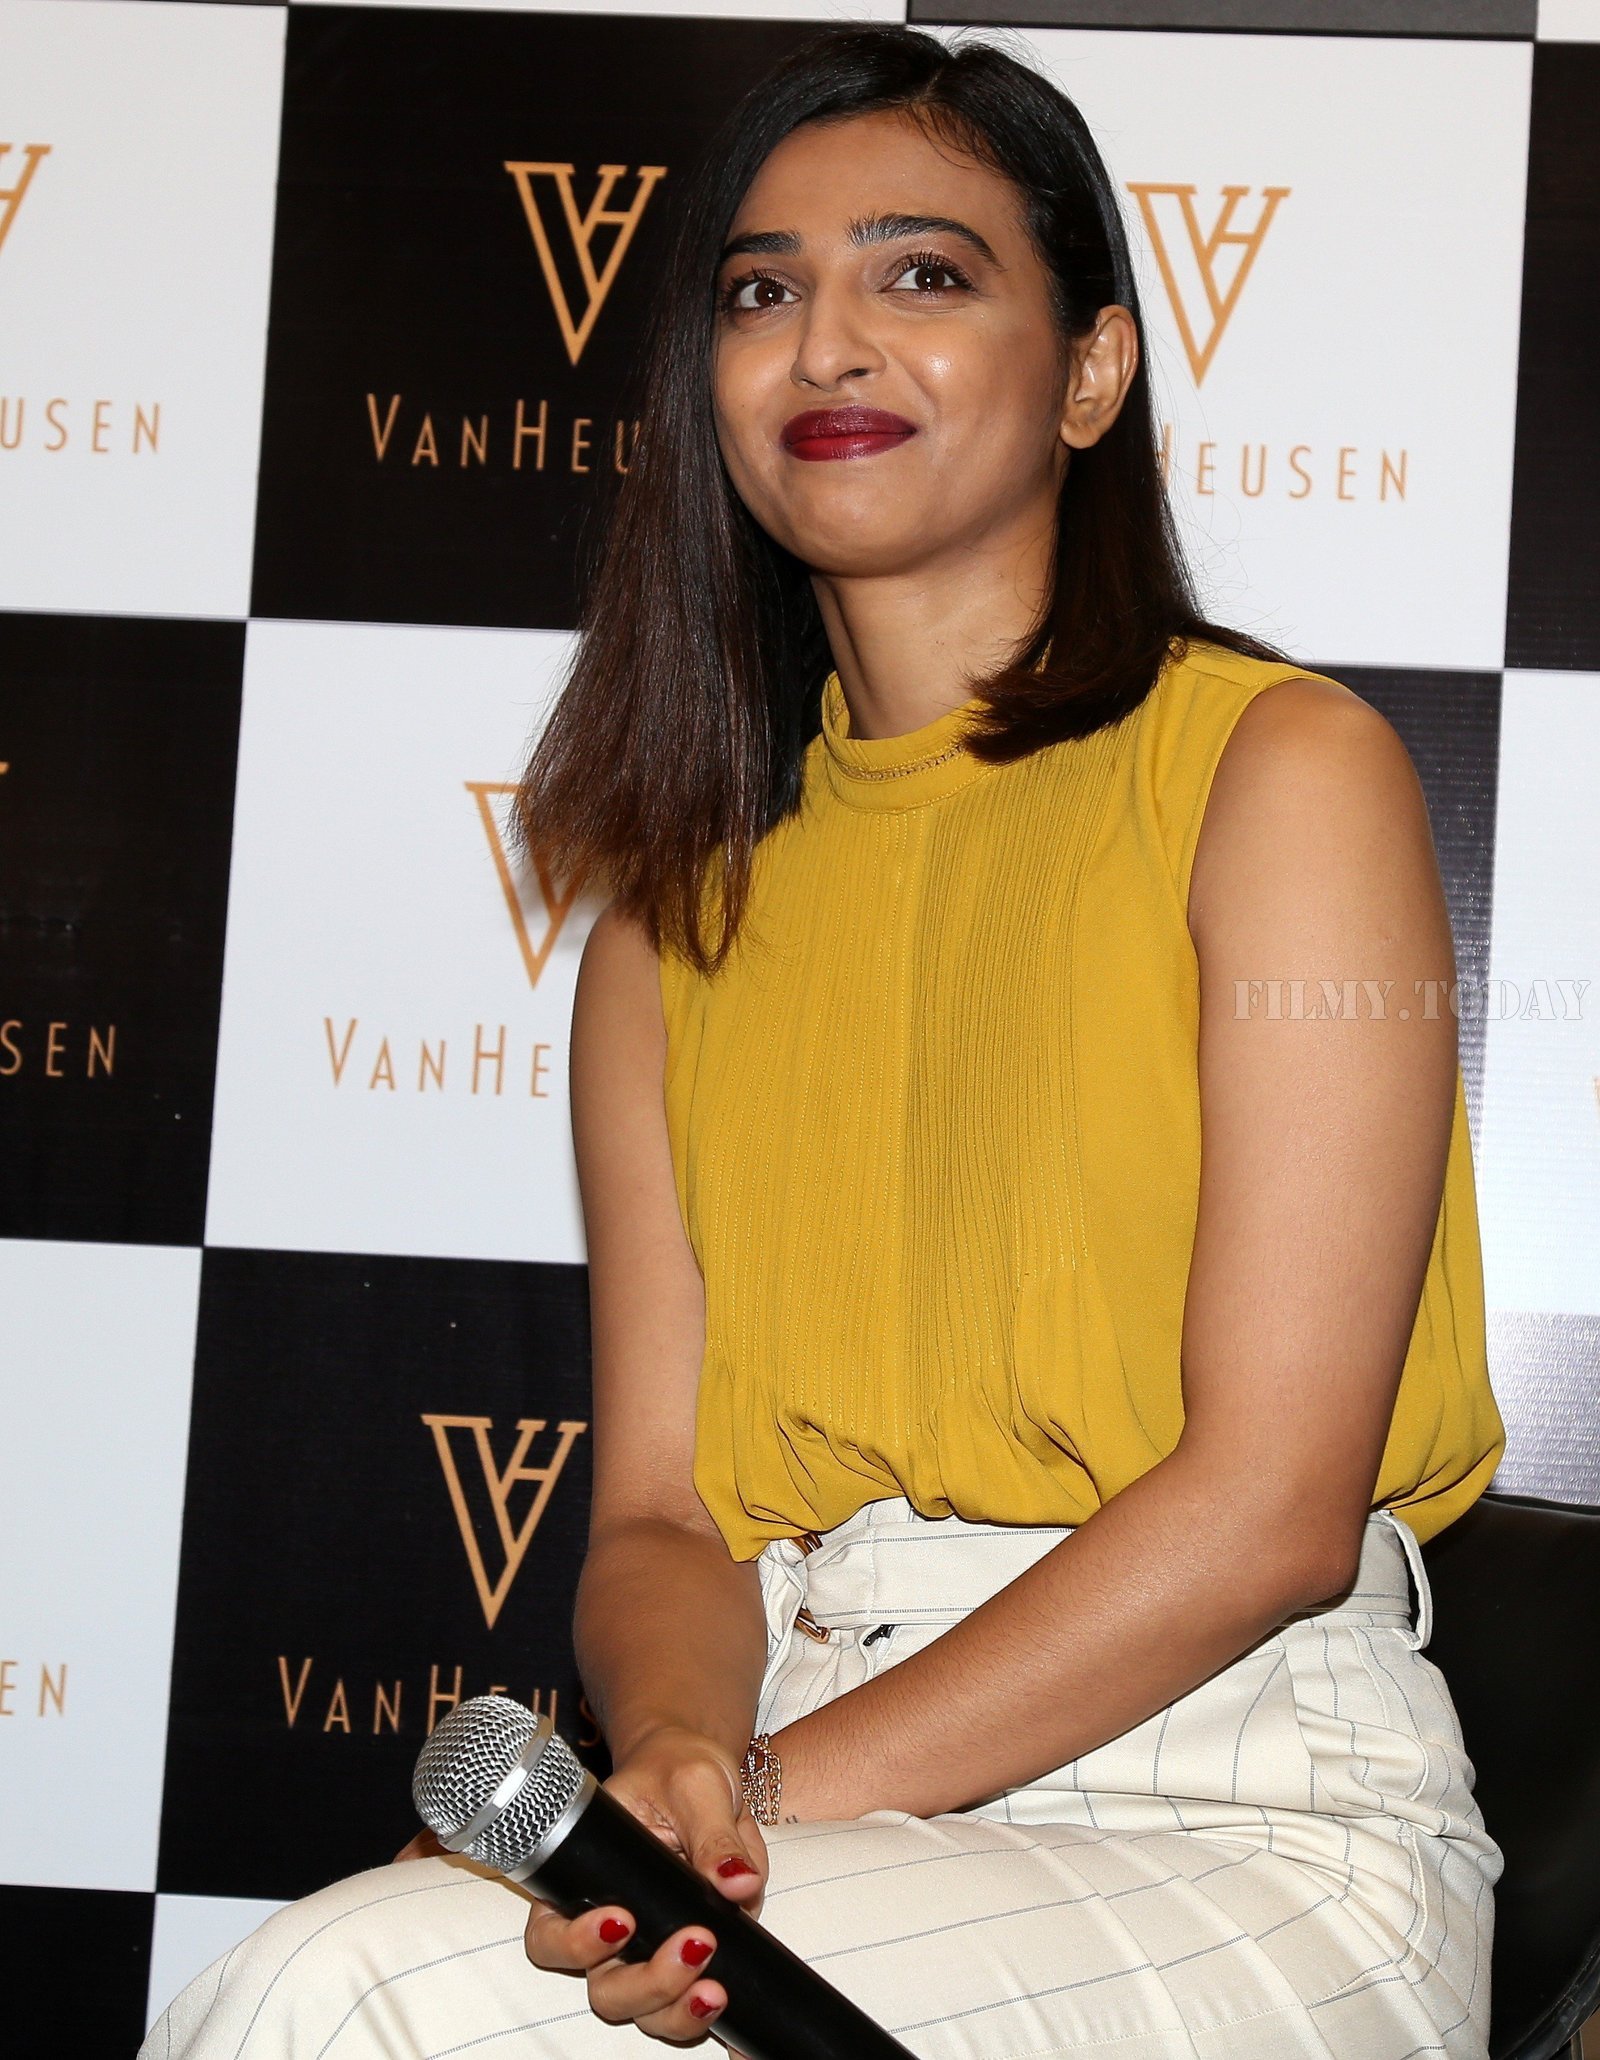 Photos: Radhika Apte At The Launch Of Van Heusen Store in Bandra | Picture 1646863